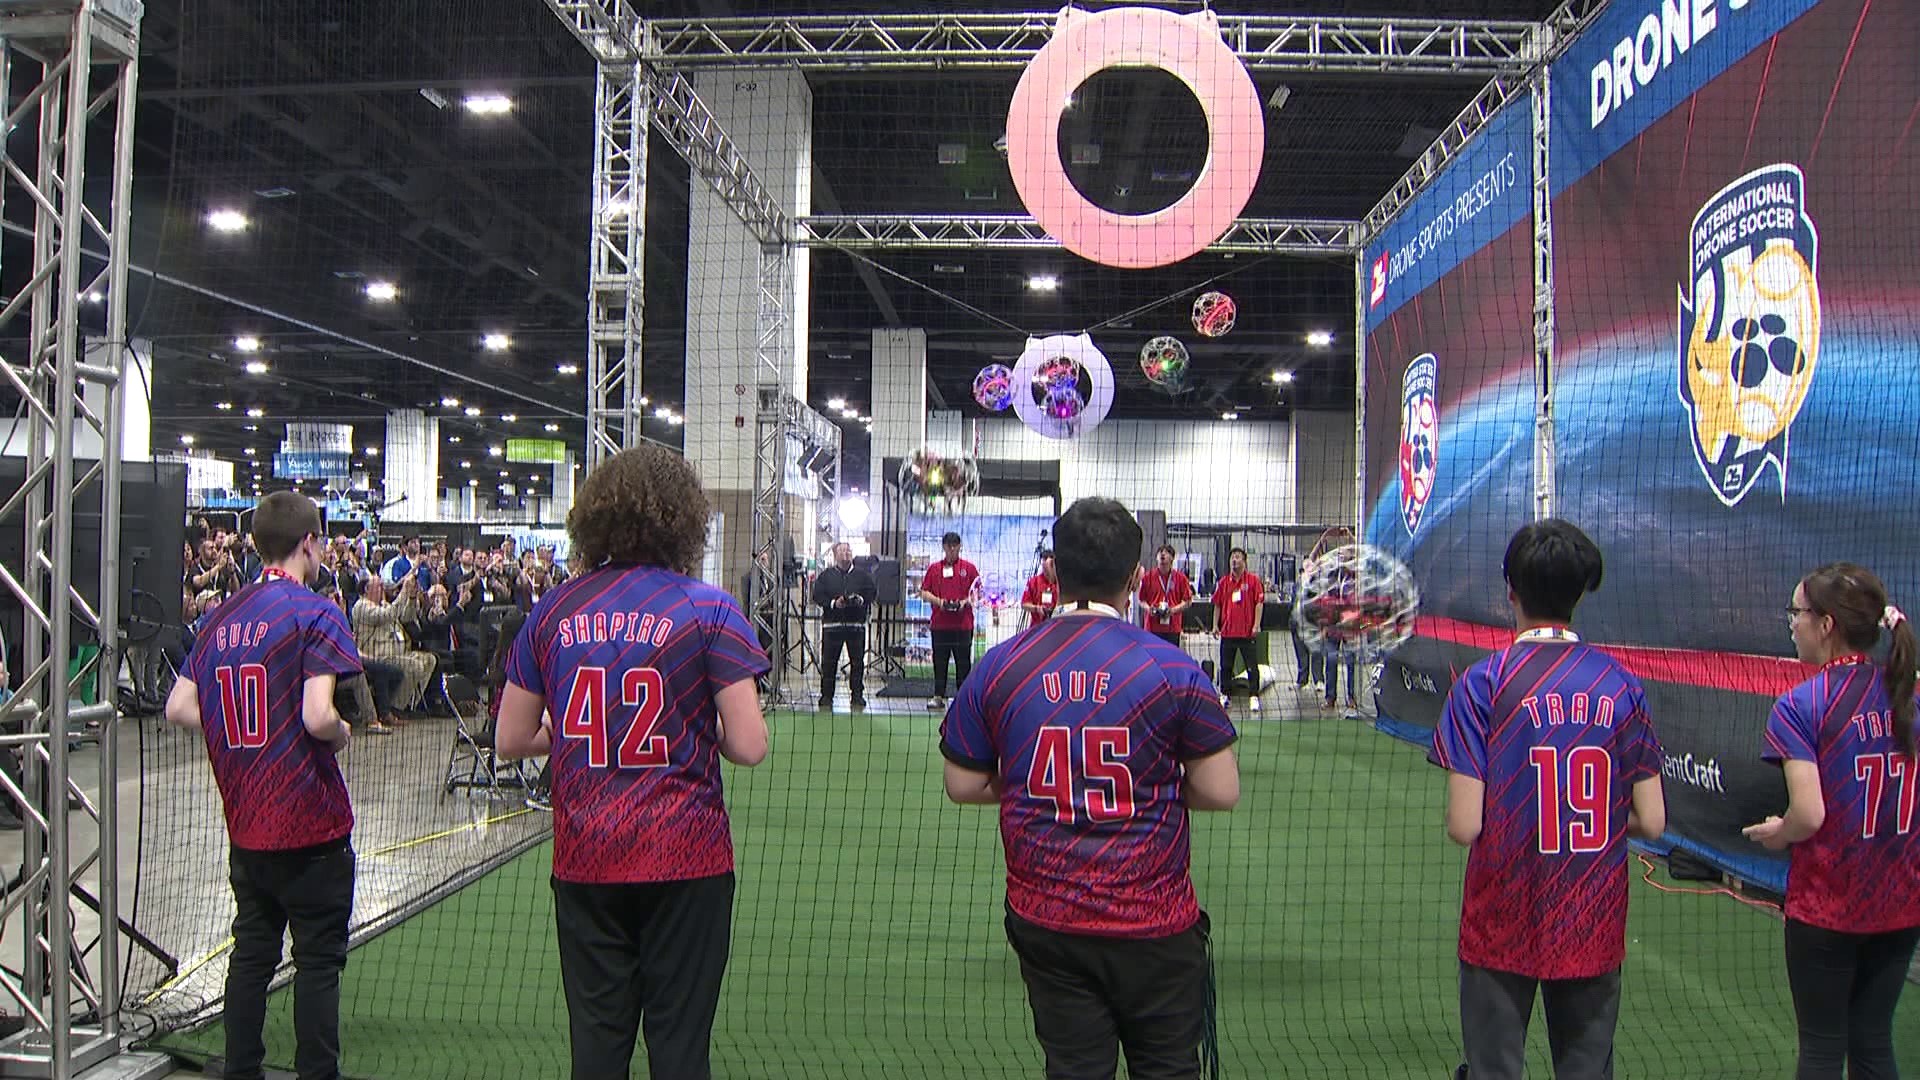 The US drone soccer team is headed to South Korea for the Drone Soccer World Championship.